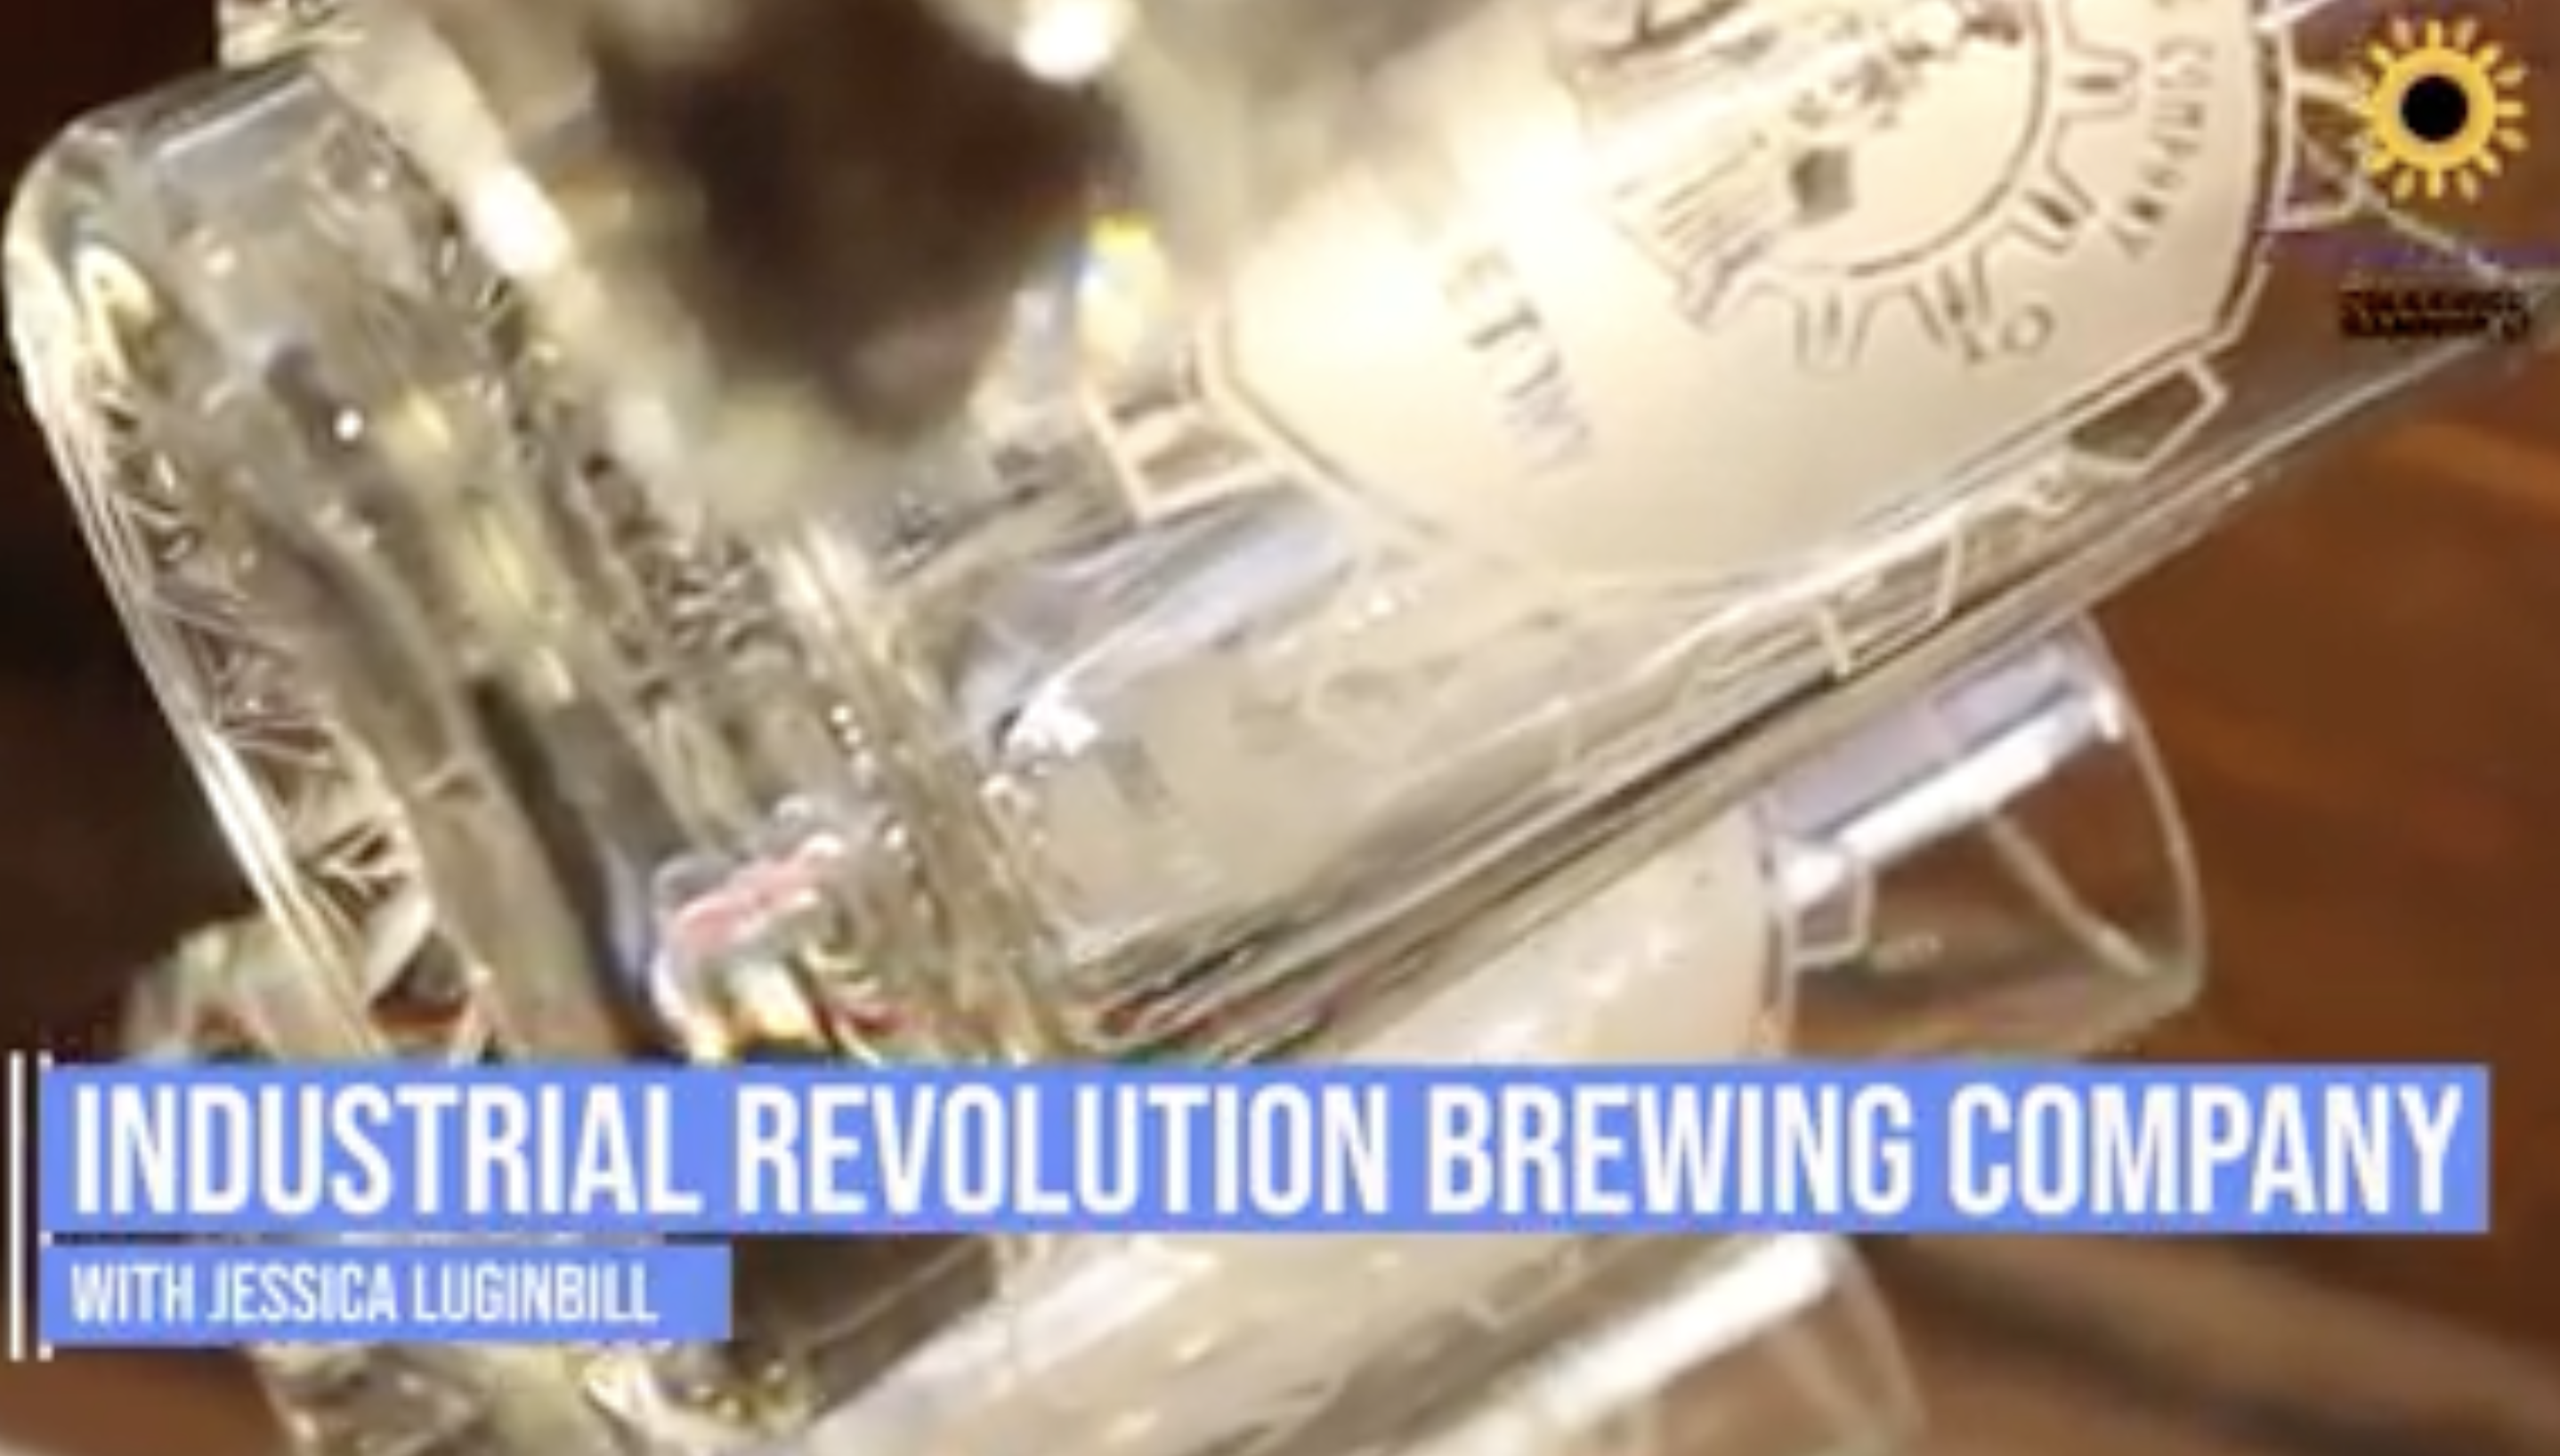 Experience Erie with Industrial Revolution Brewing